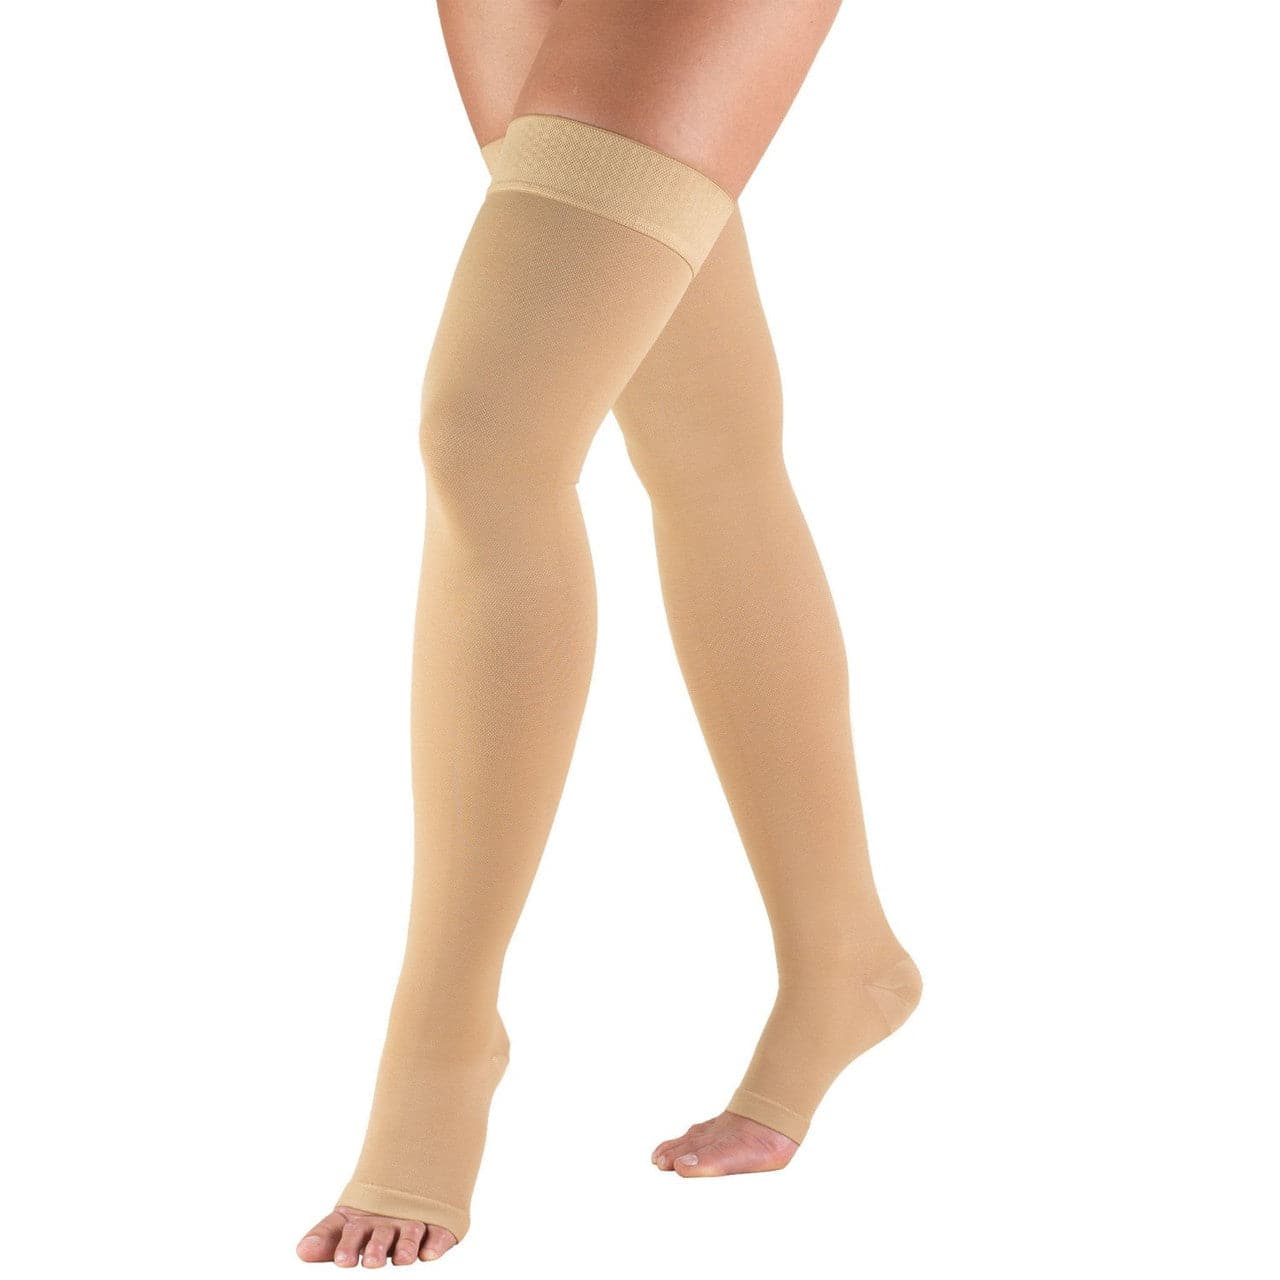 Airway Surgical Truform Thigh High Open Toe Stockings Unisex 20-30